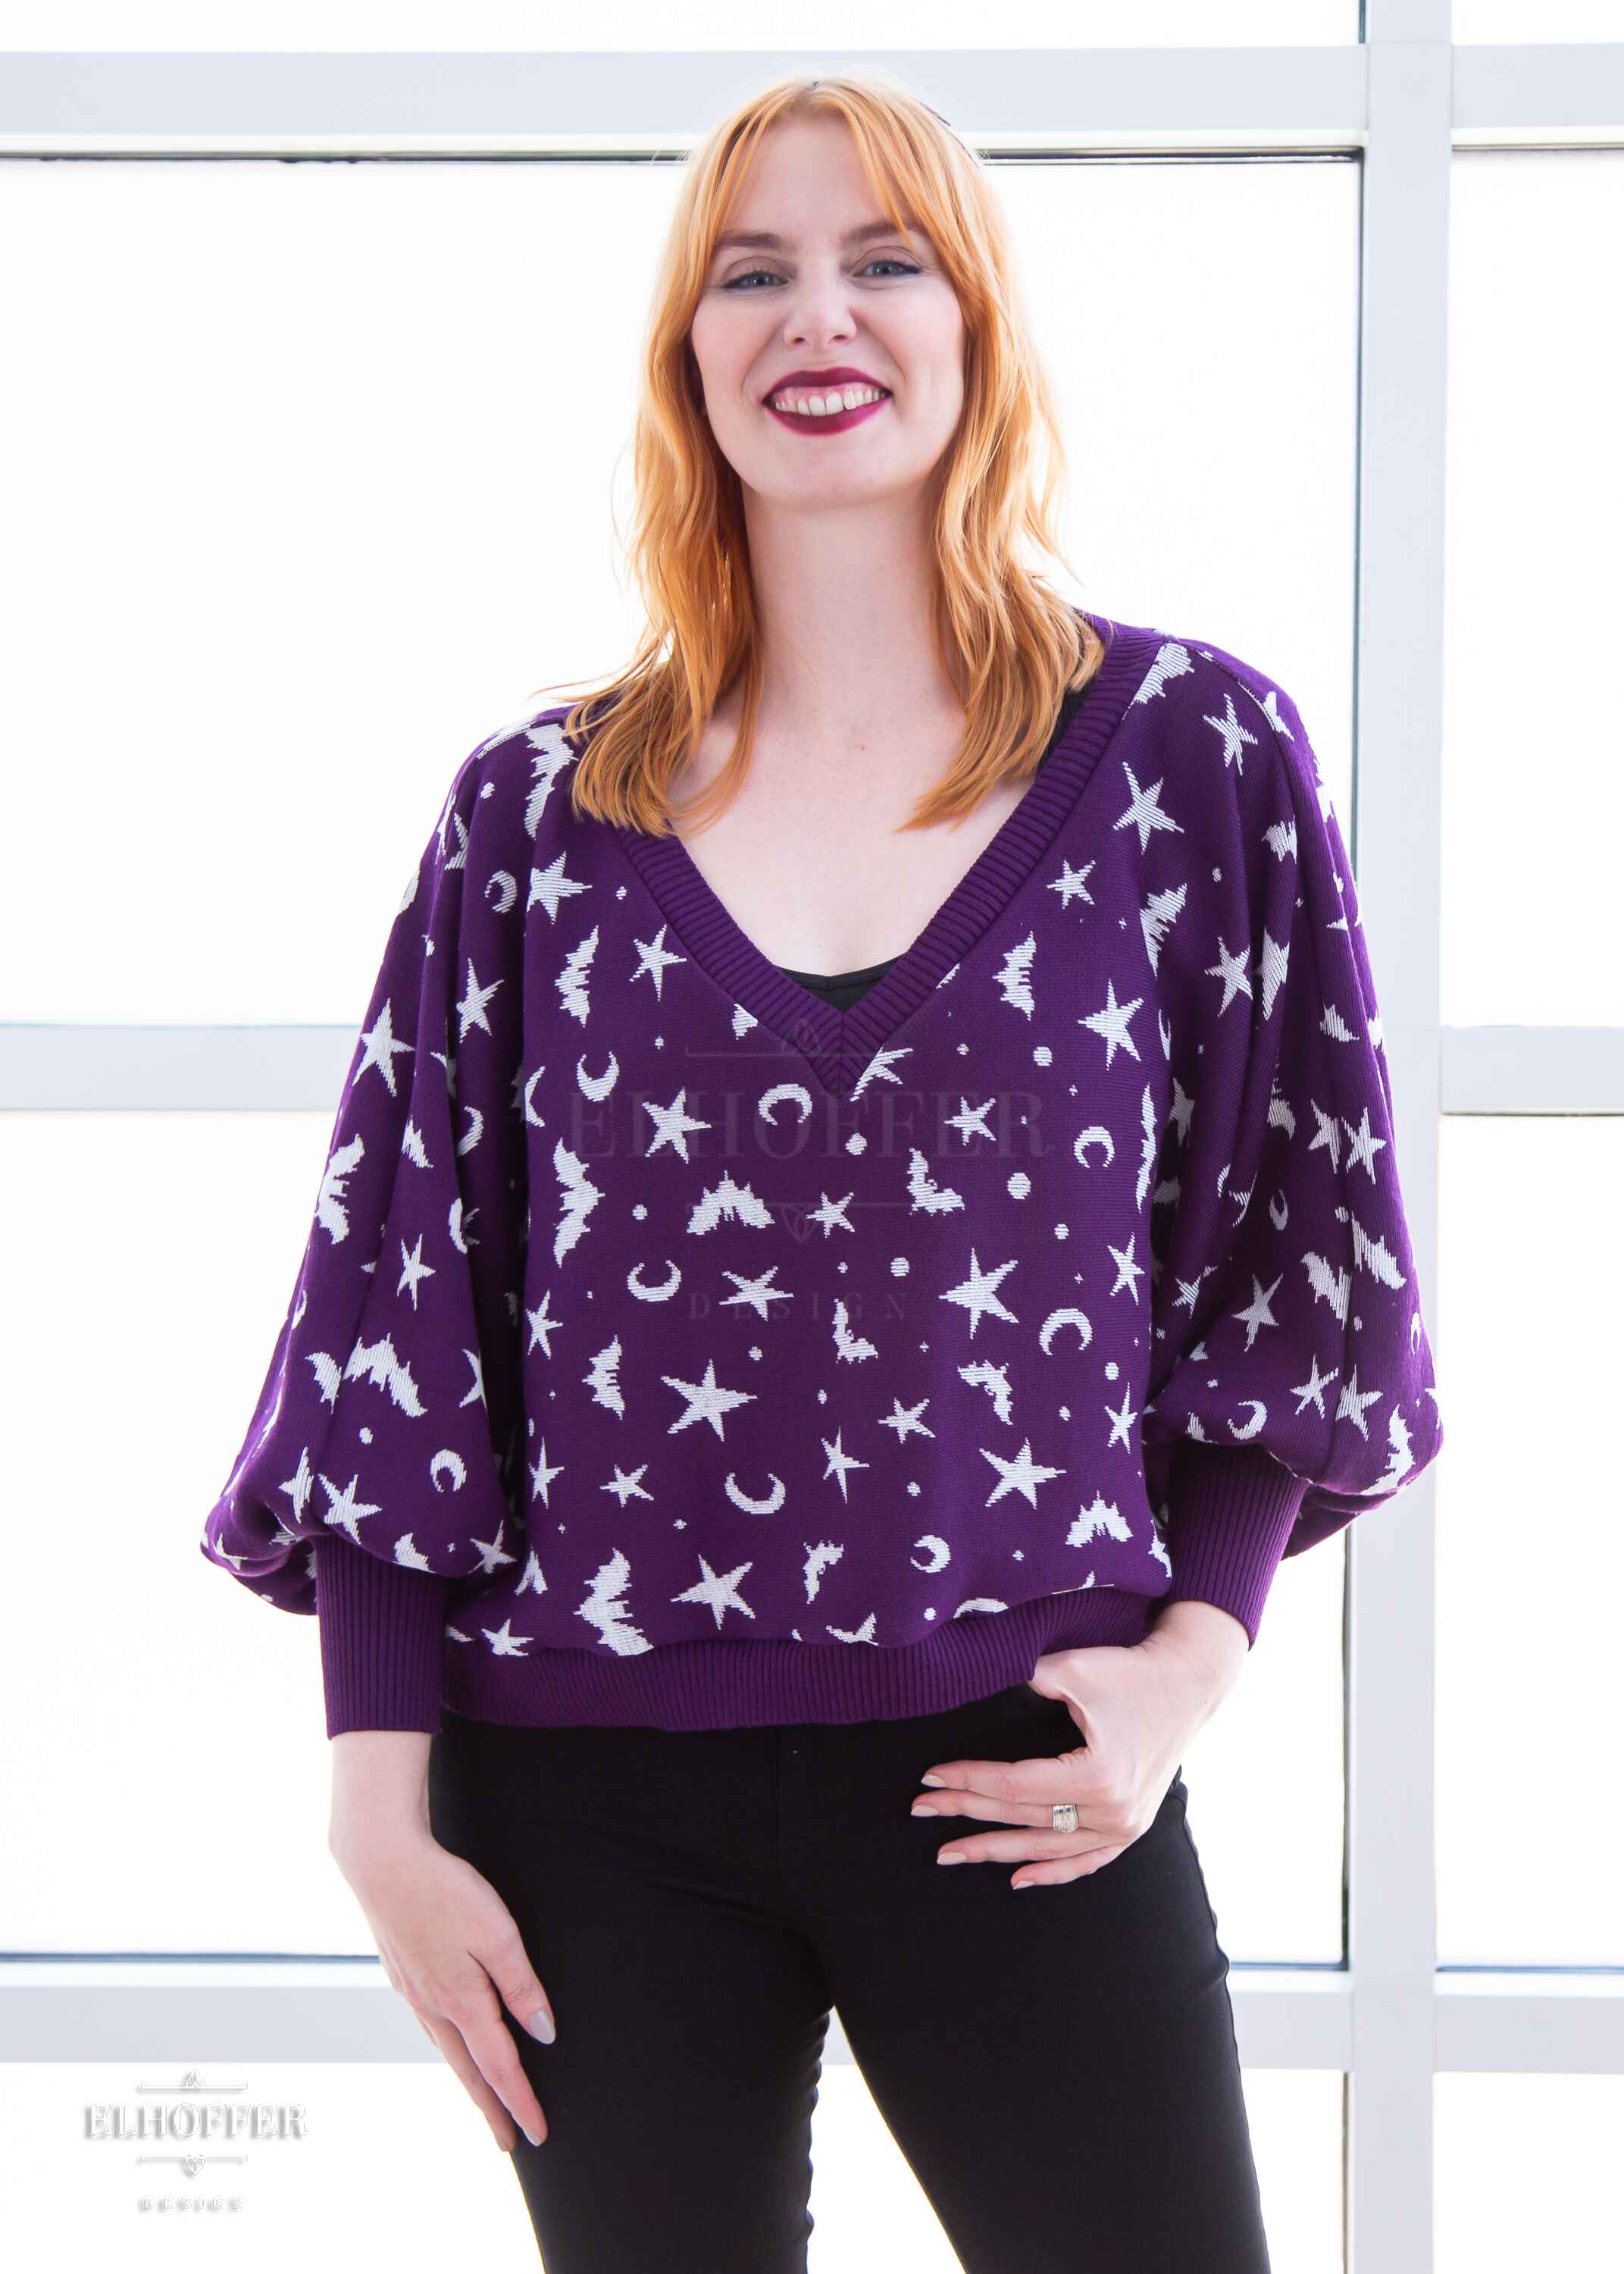 Harley, a fair skinned S model with shoulder length strawberry blonde hair, is smiling while wearing an oversized v neck cropped sweater with batwing sleeves that gather at the wrist. The main body of the sweater is purple with a white bat, star, moon, and dot pattern repeated throughout.